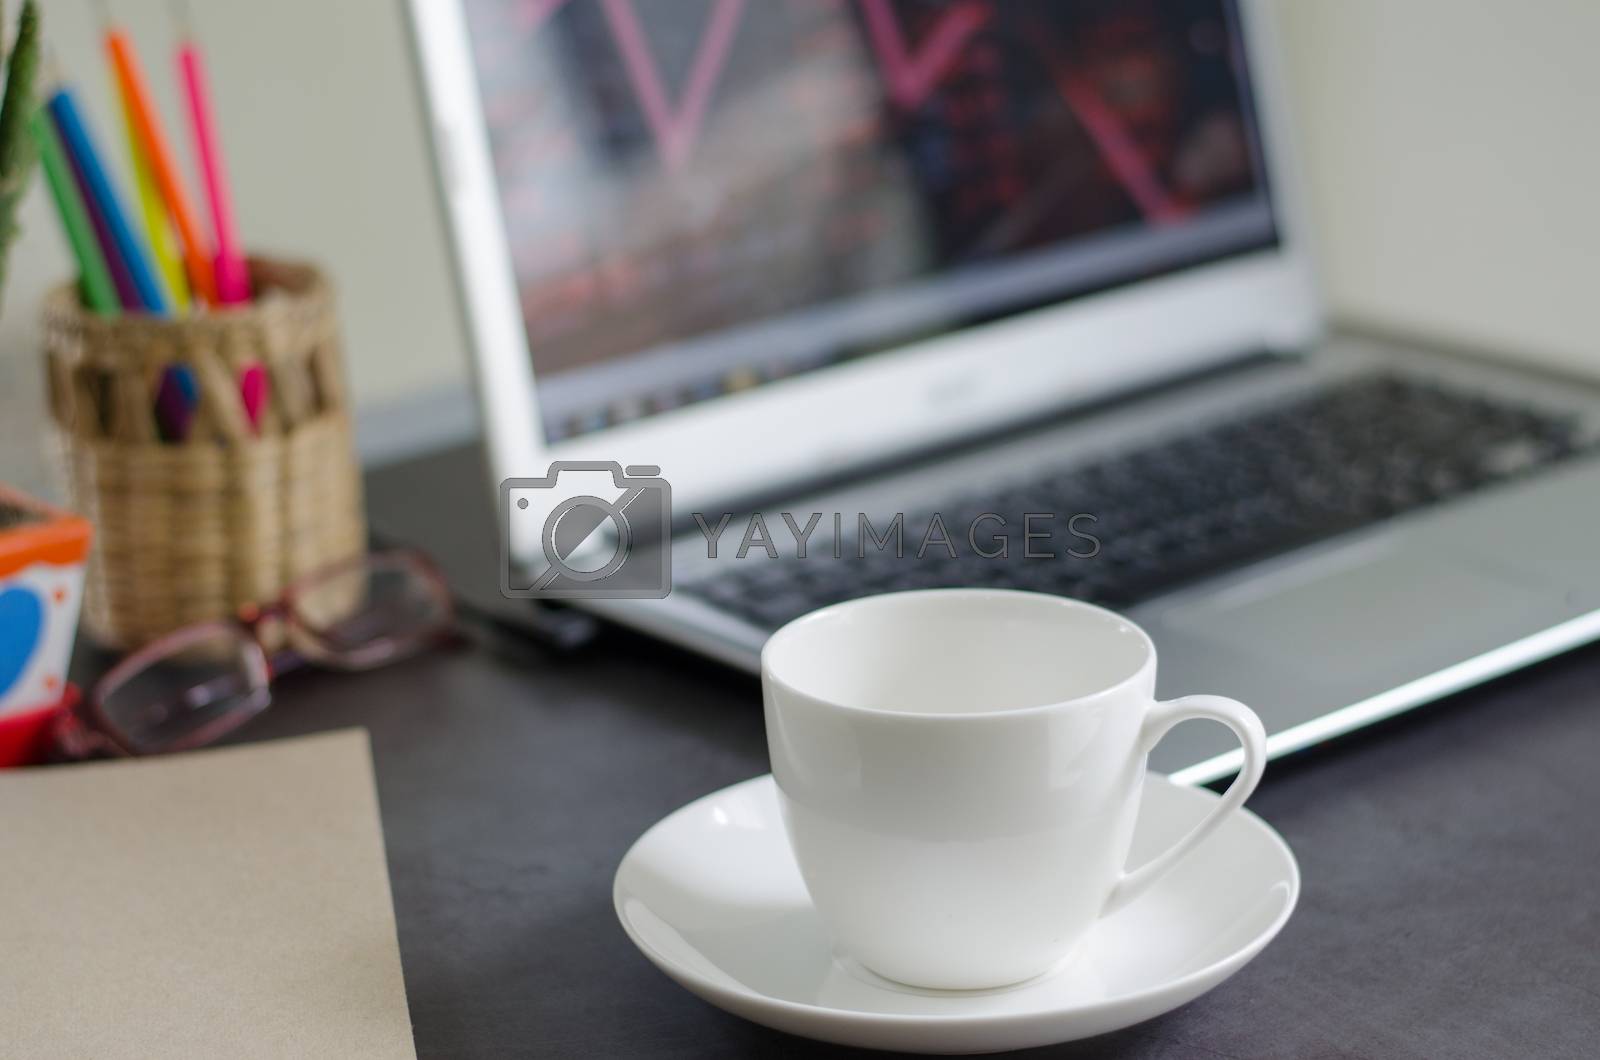 Royalty free image of Coffee mugs and laptops on work desk at home. by kitti